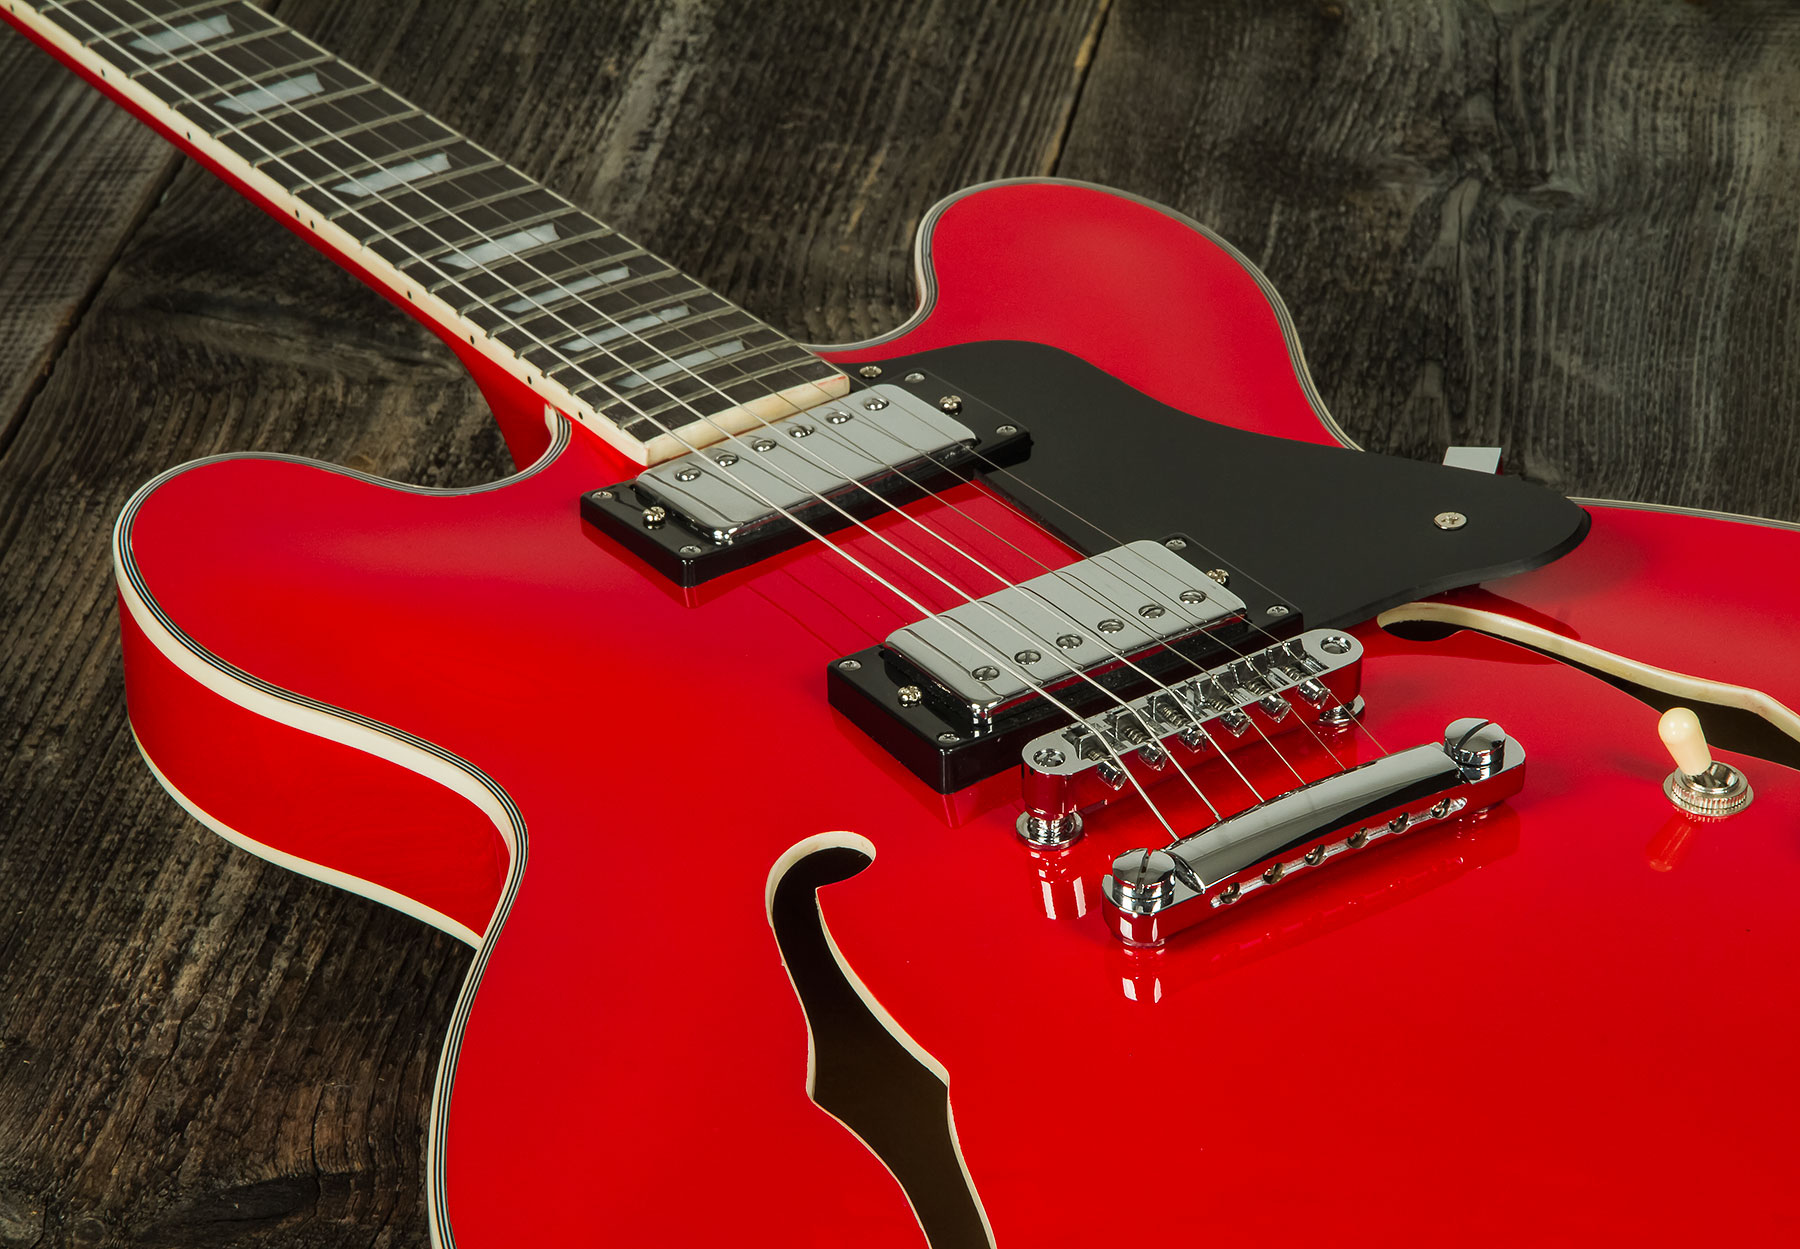 Eastone Gj70 Hh Ht Pur - Red - Semi-hollow electric guitar - Variation 3